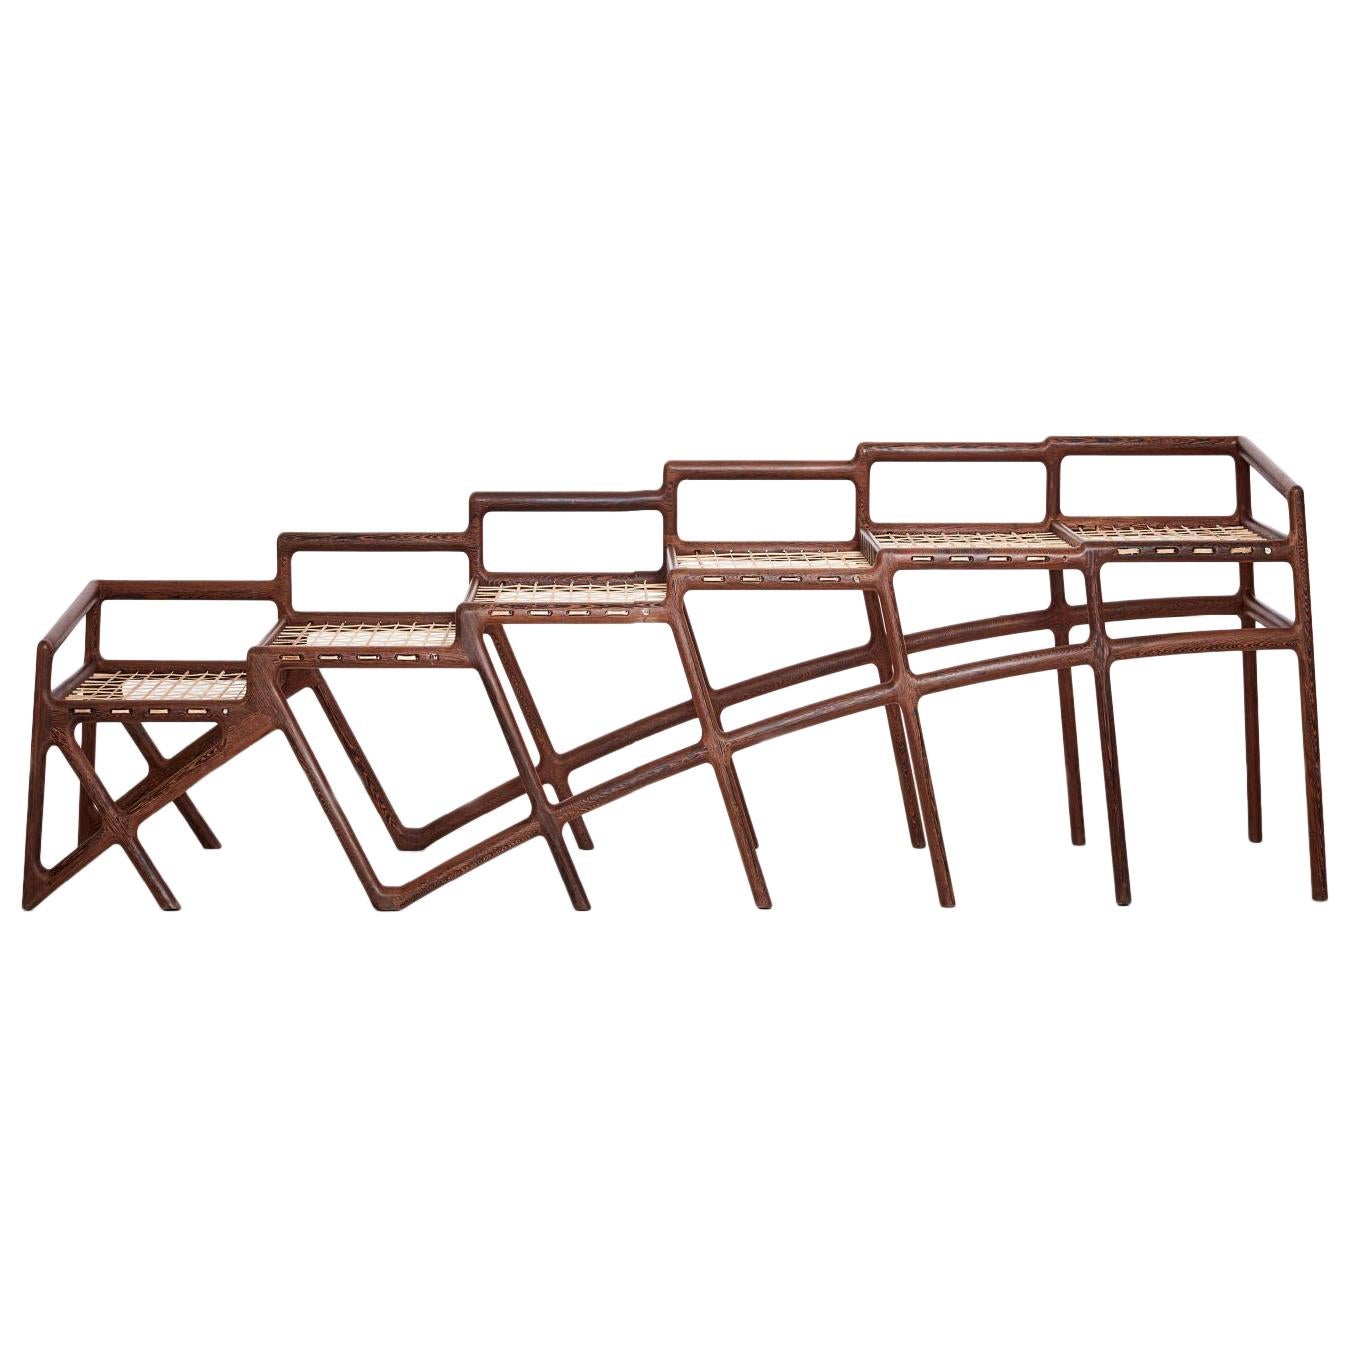 David Krynauw, "Jeppestown Waiting Bench", Wenge and Cowhide String